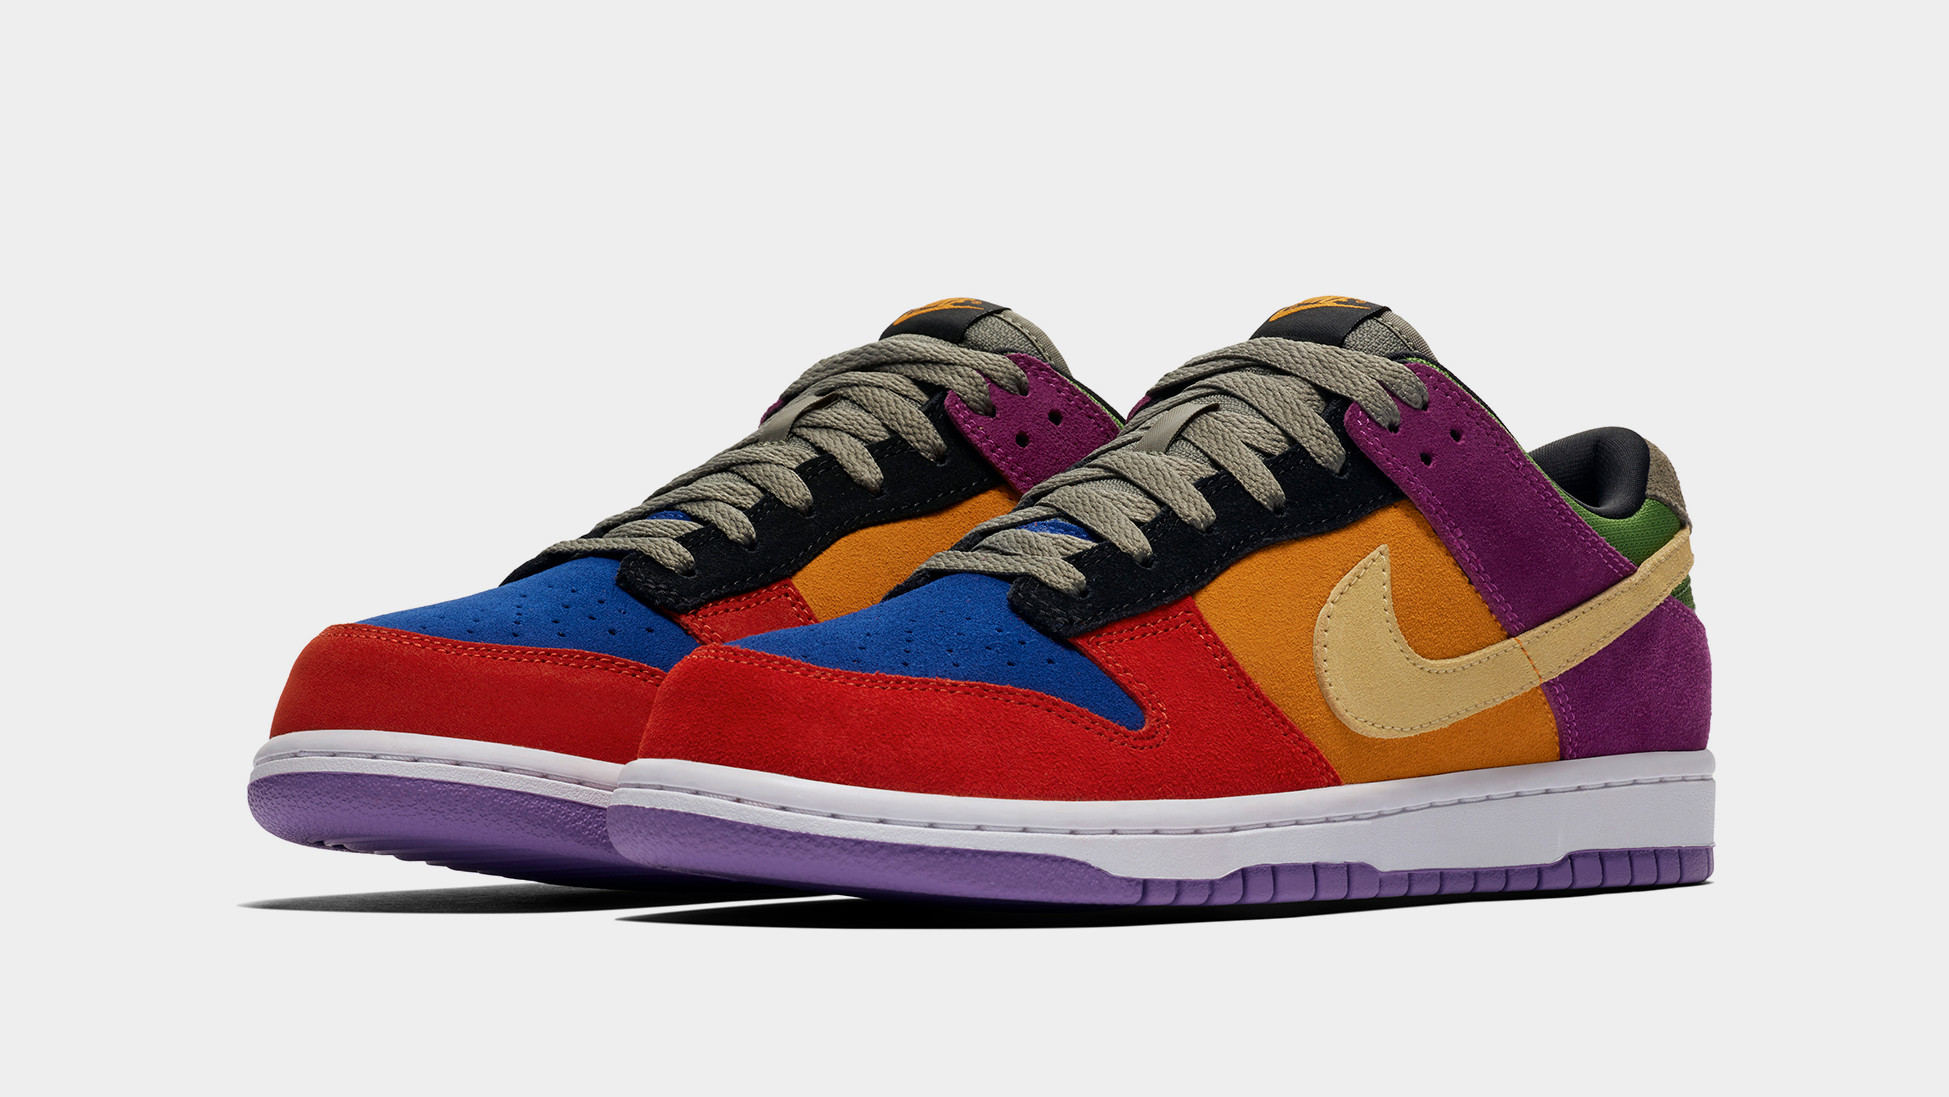 wrijving water open haard Nike Dunk Low SP 'Viotech' 2019 Retro CT5050-500 Release Date | Sole  Collector